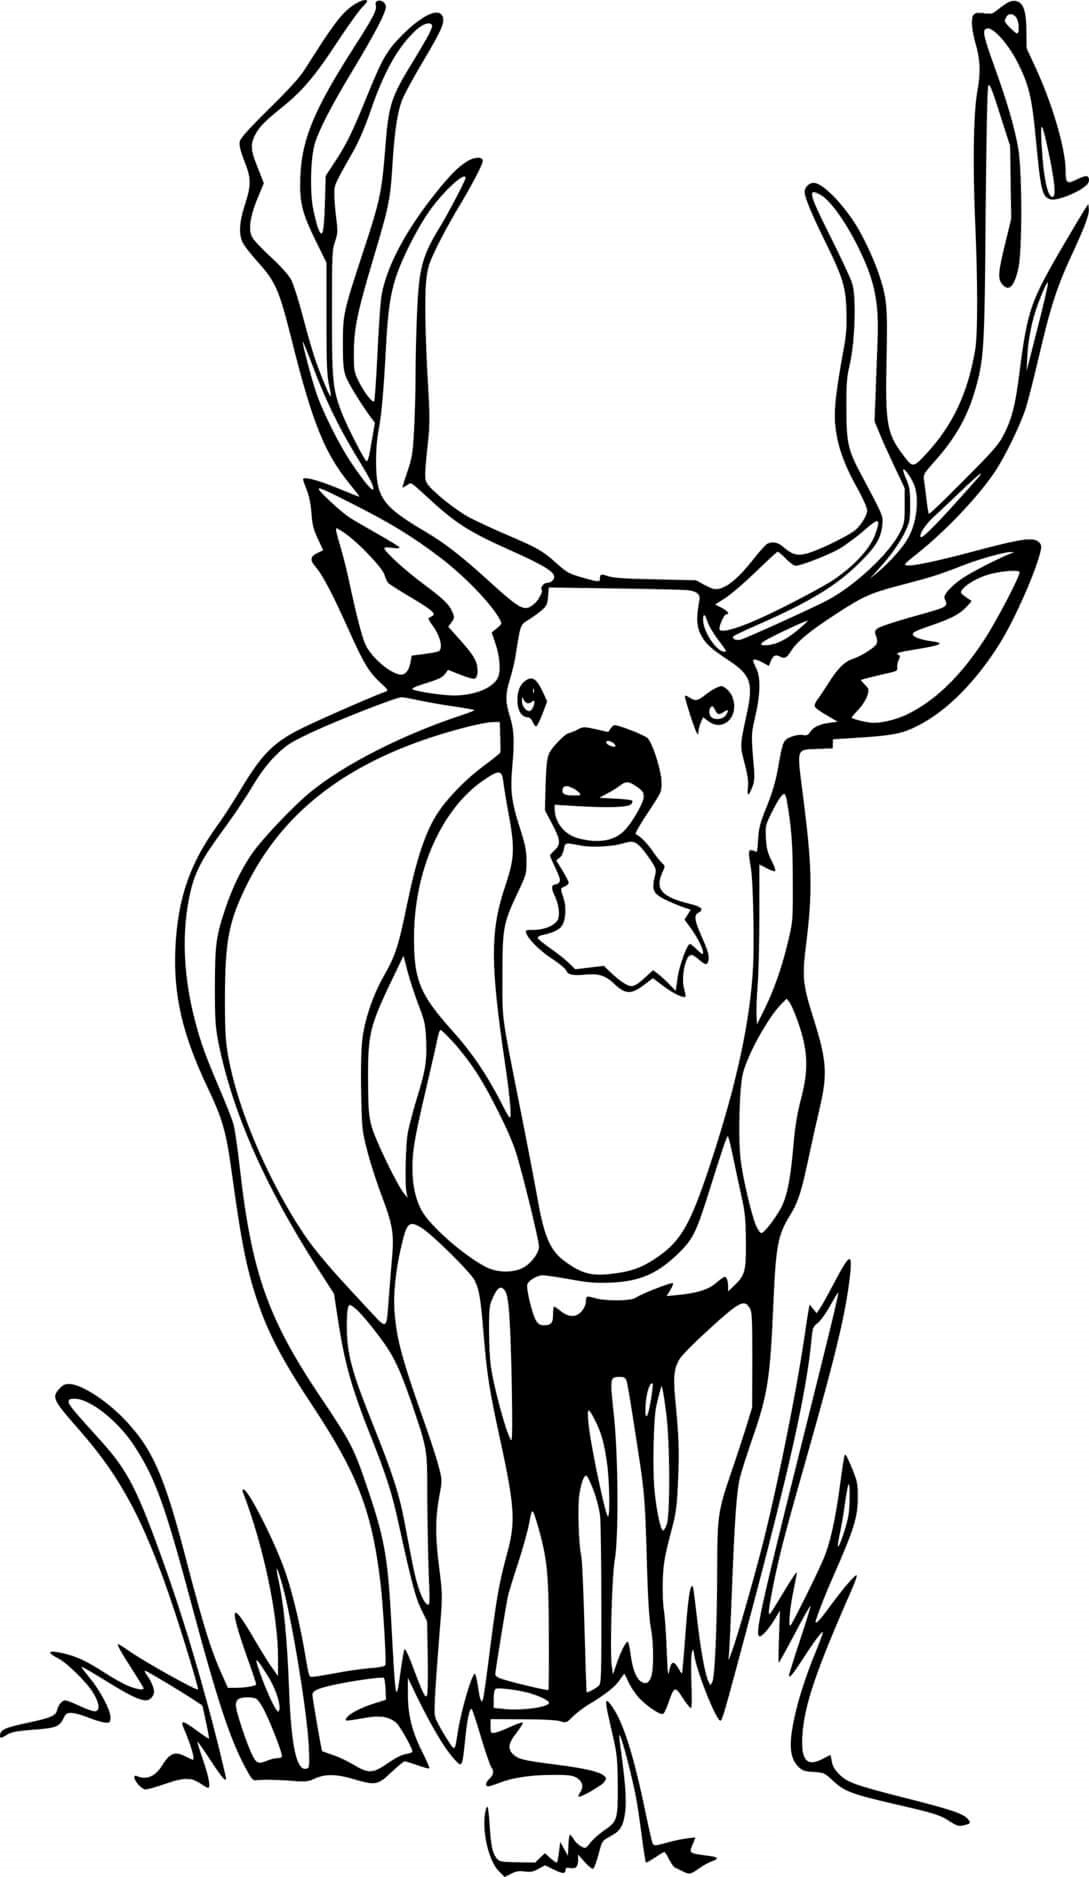 Whitetail On The Grasses Coloring Page